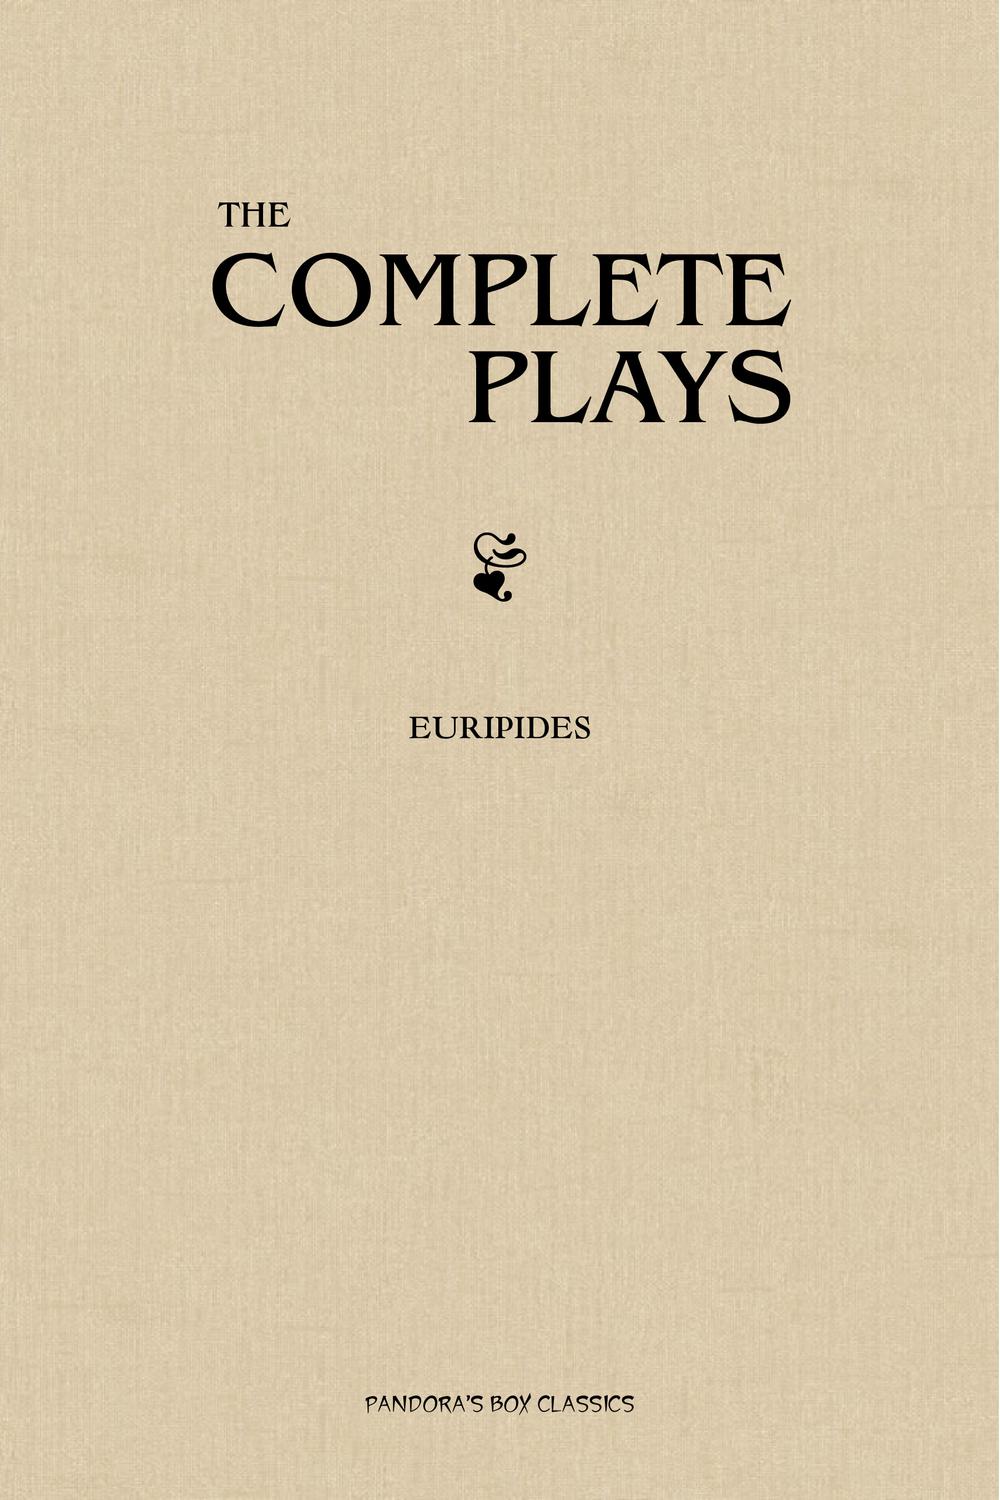 The Complete Euripides - Euripides